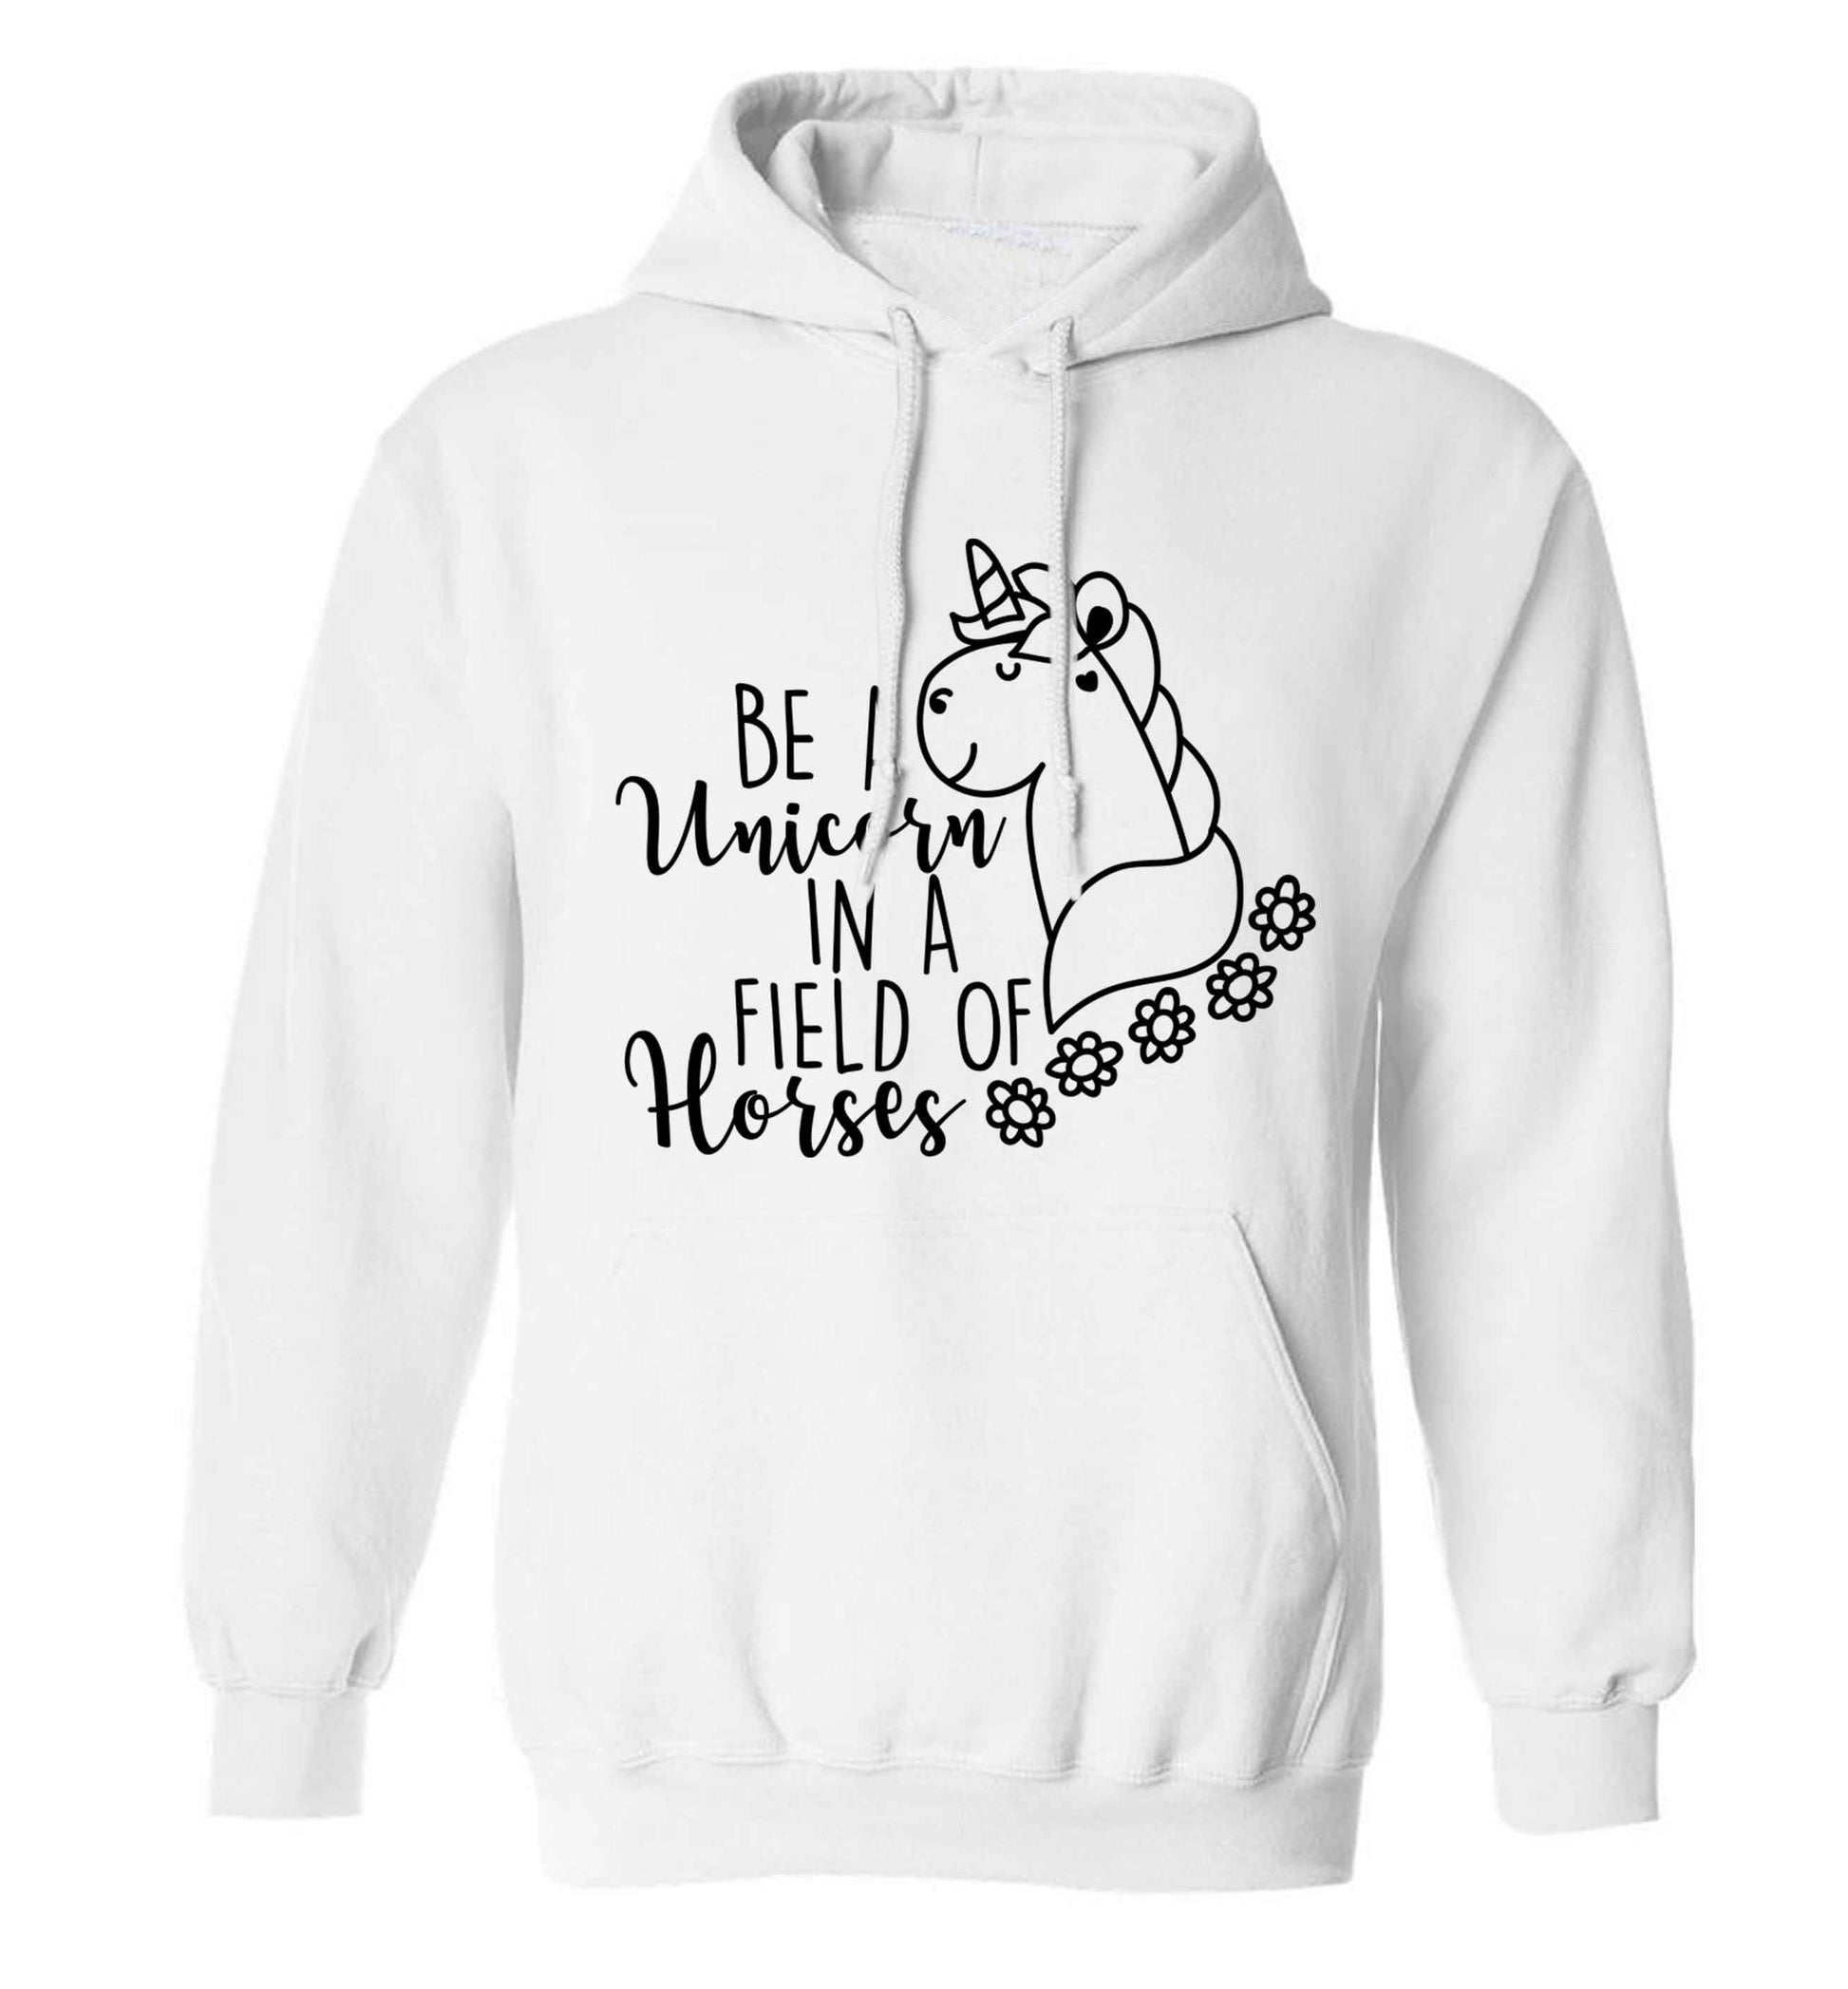 Be a unicorn in a field of horses adults unisex white hoodie 2XL